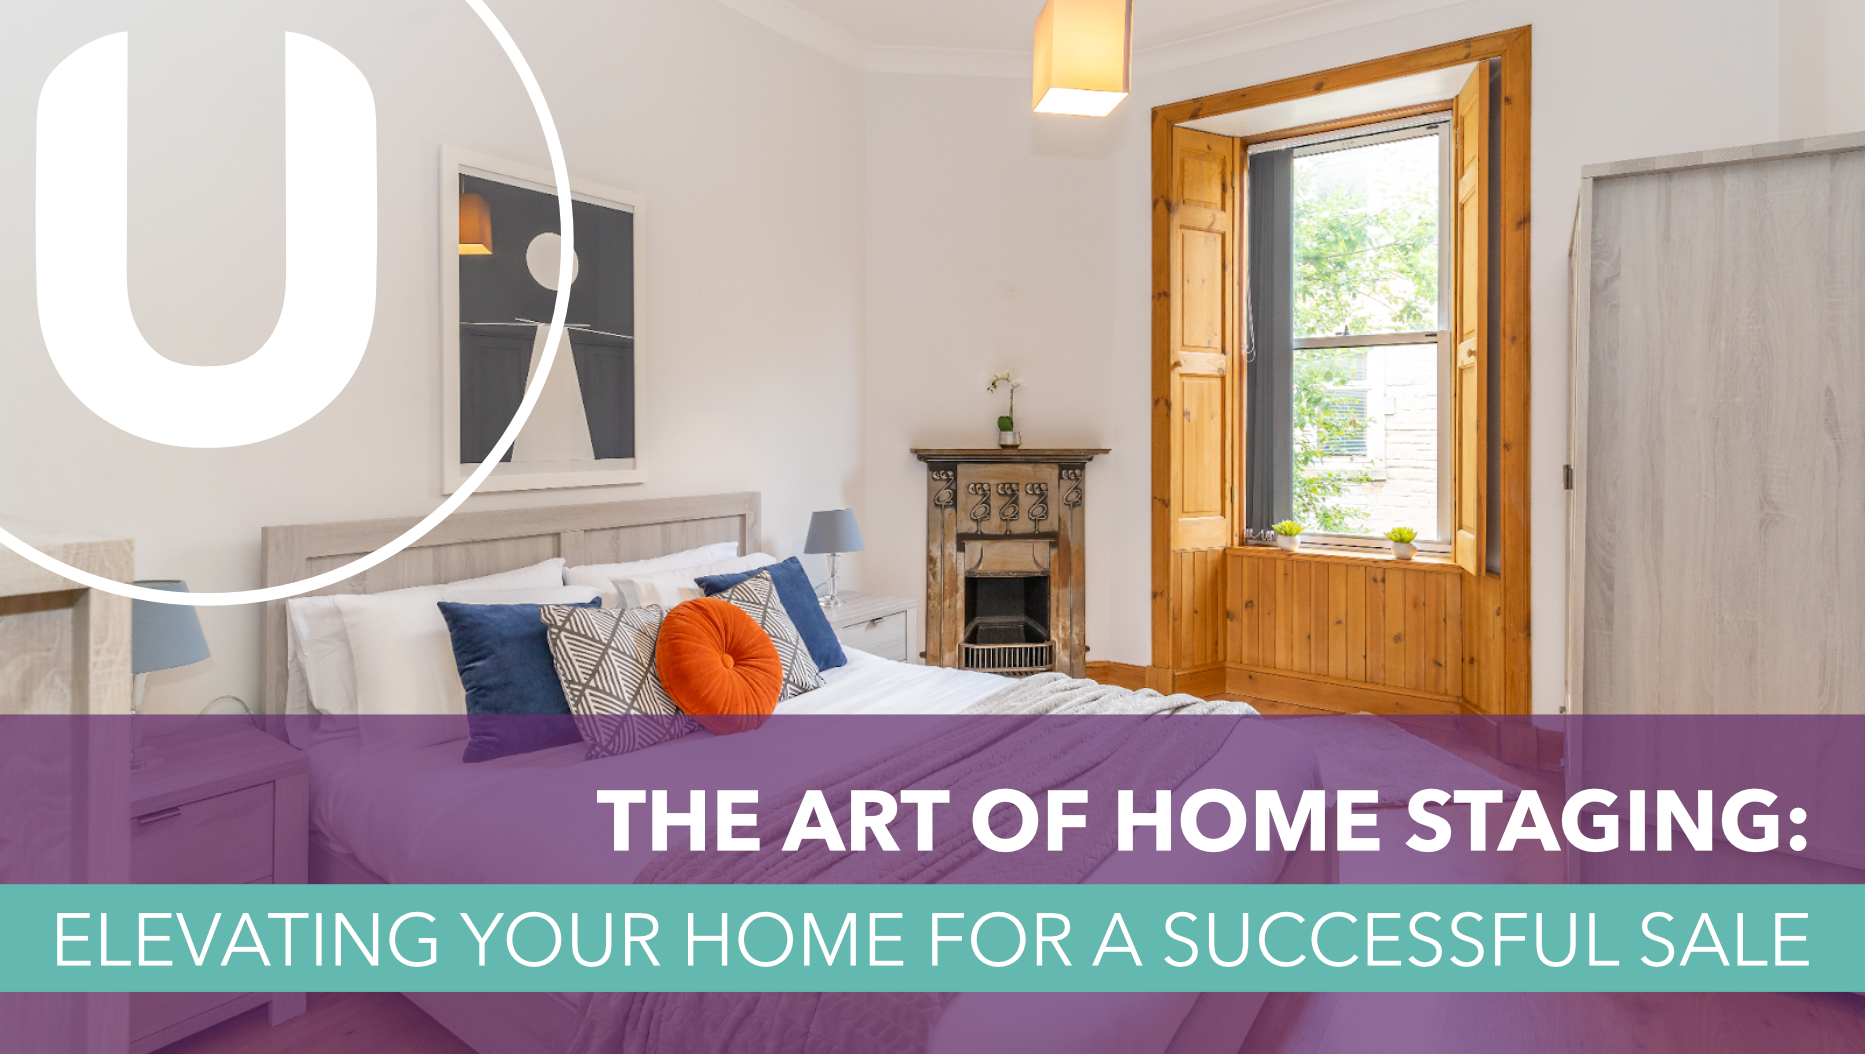 The Art of Home Staging: Elevating Your Home For A Successful Sale